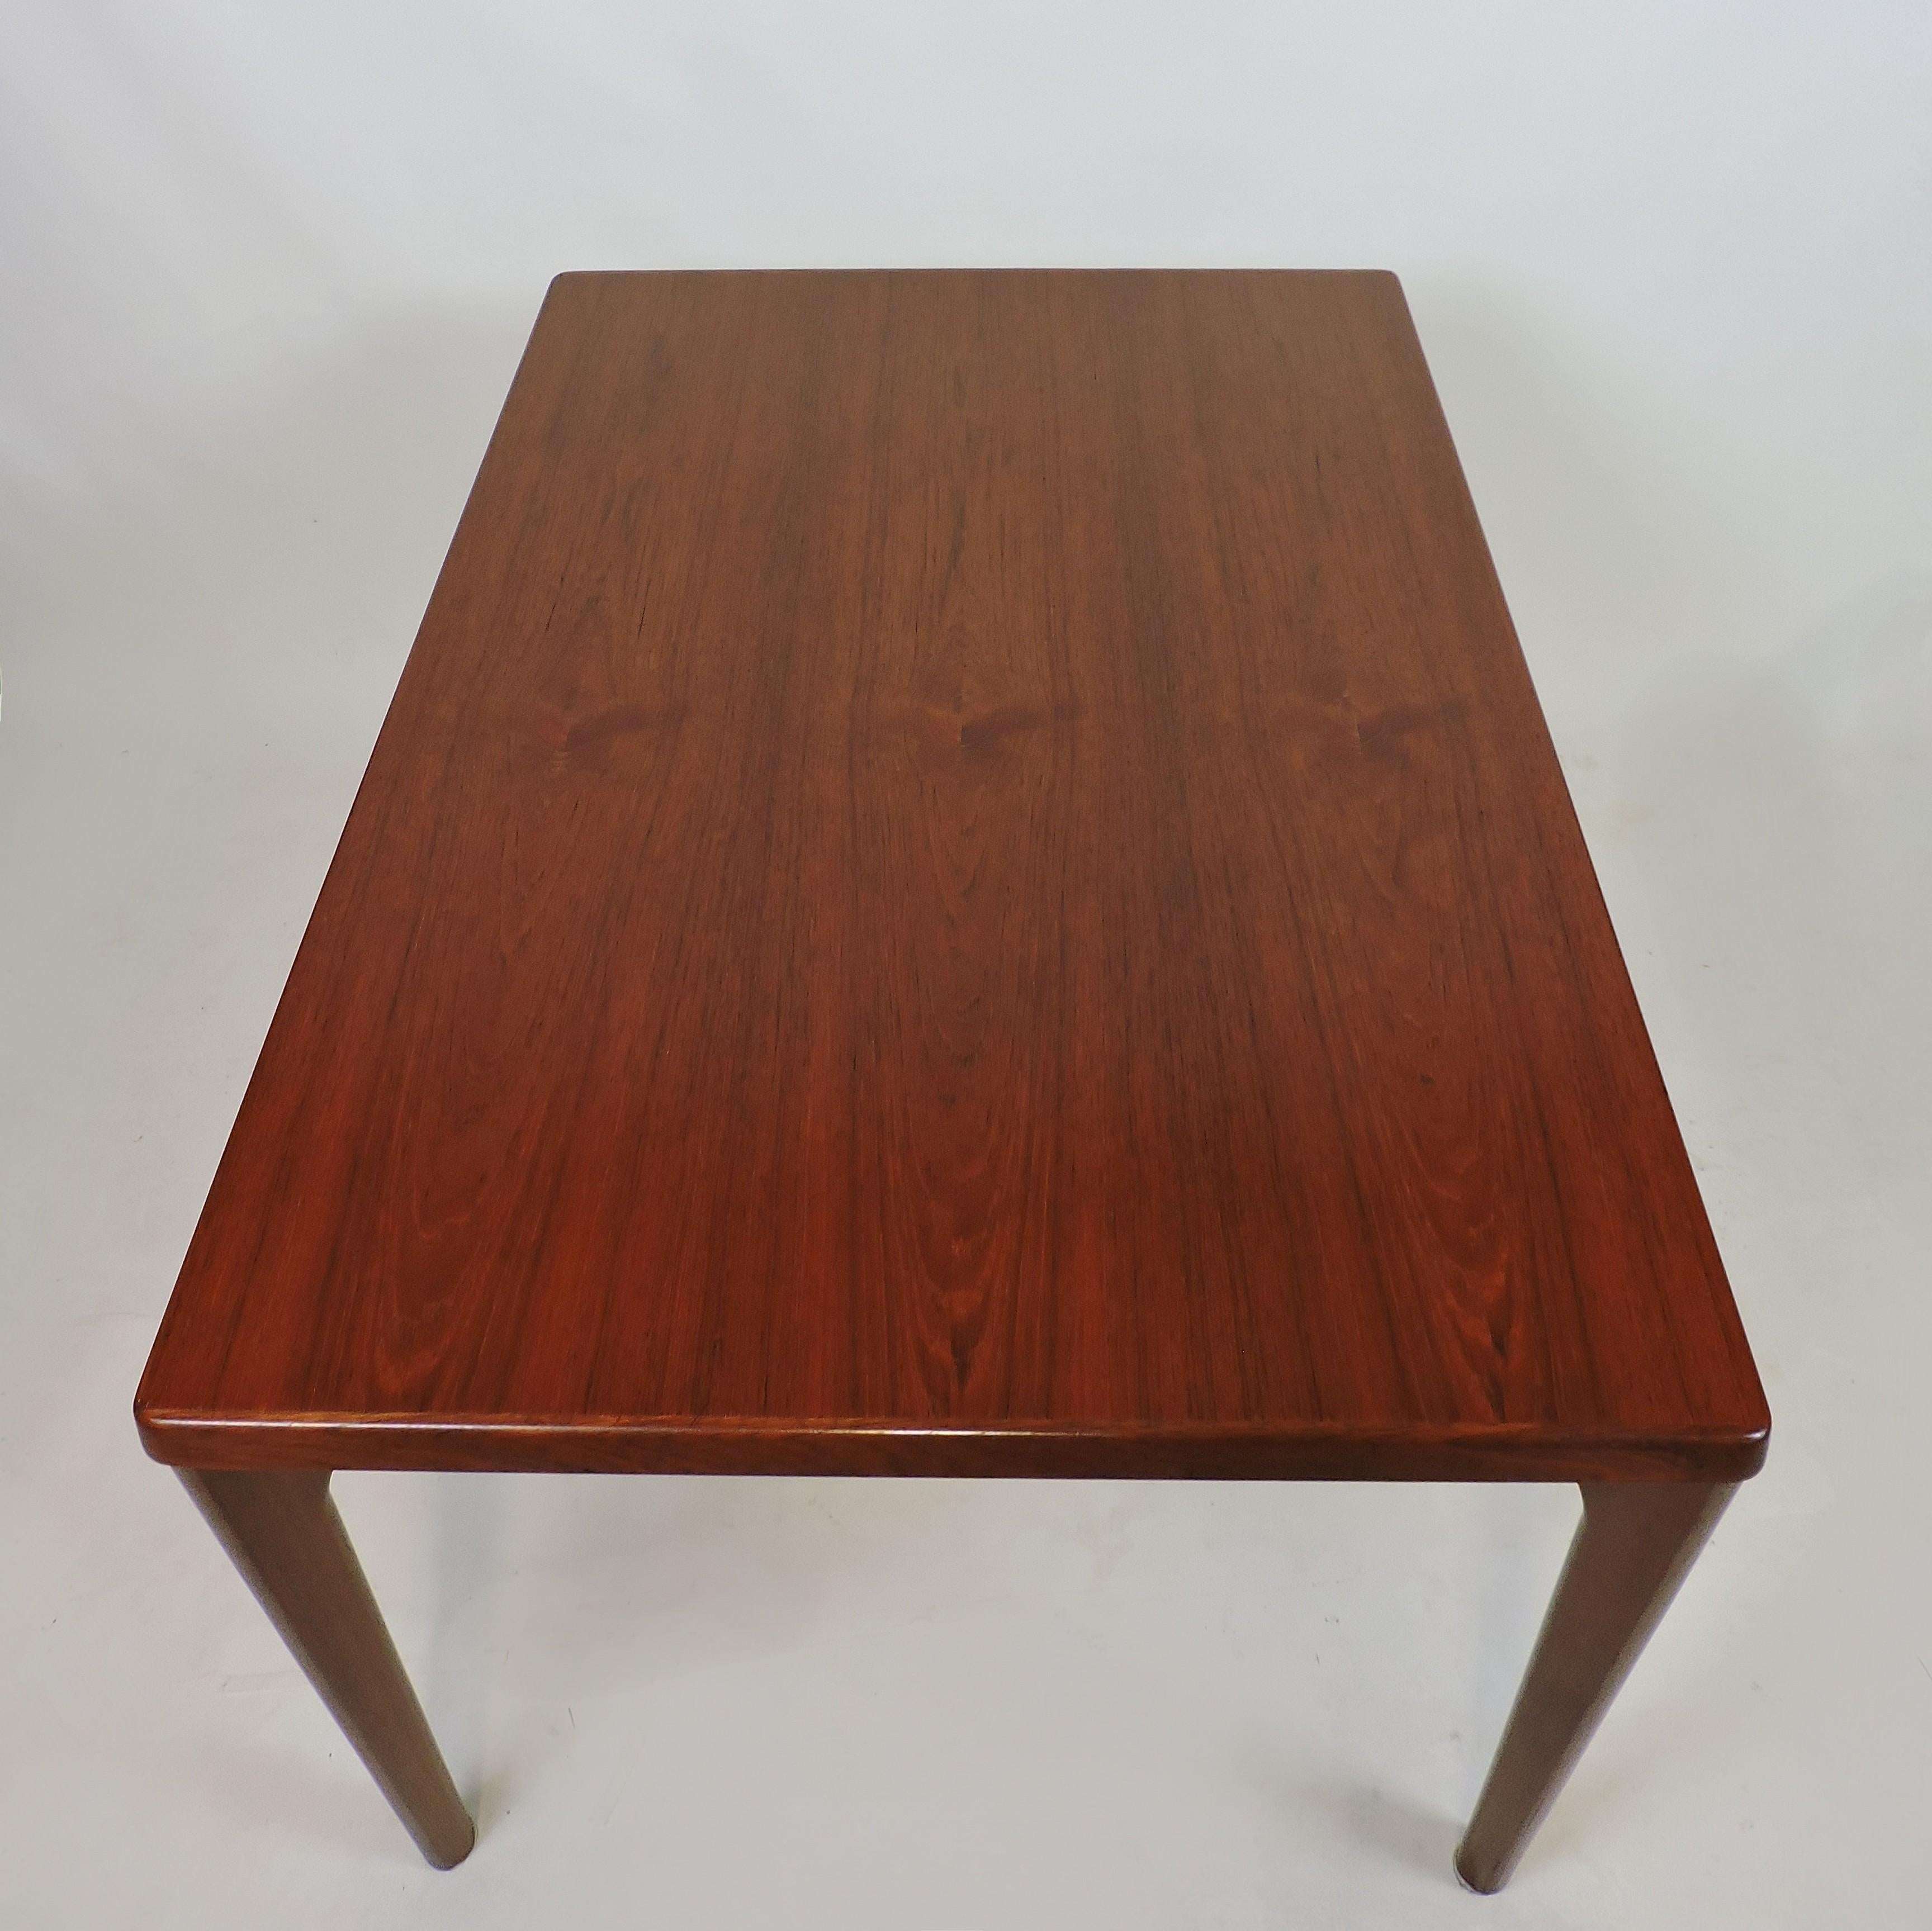 Mid-20th Century Danish Modern Teak Extendable Dining Table by Henning Kjaernulf for Vejle Stole